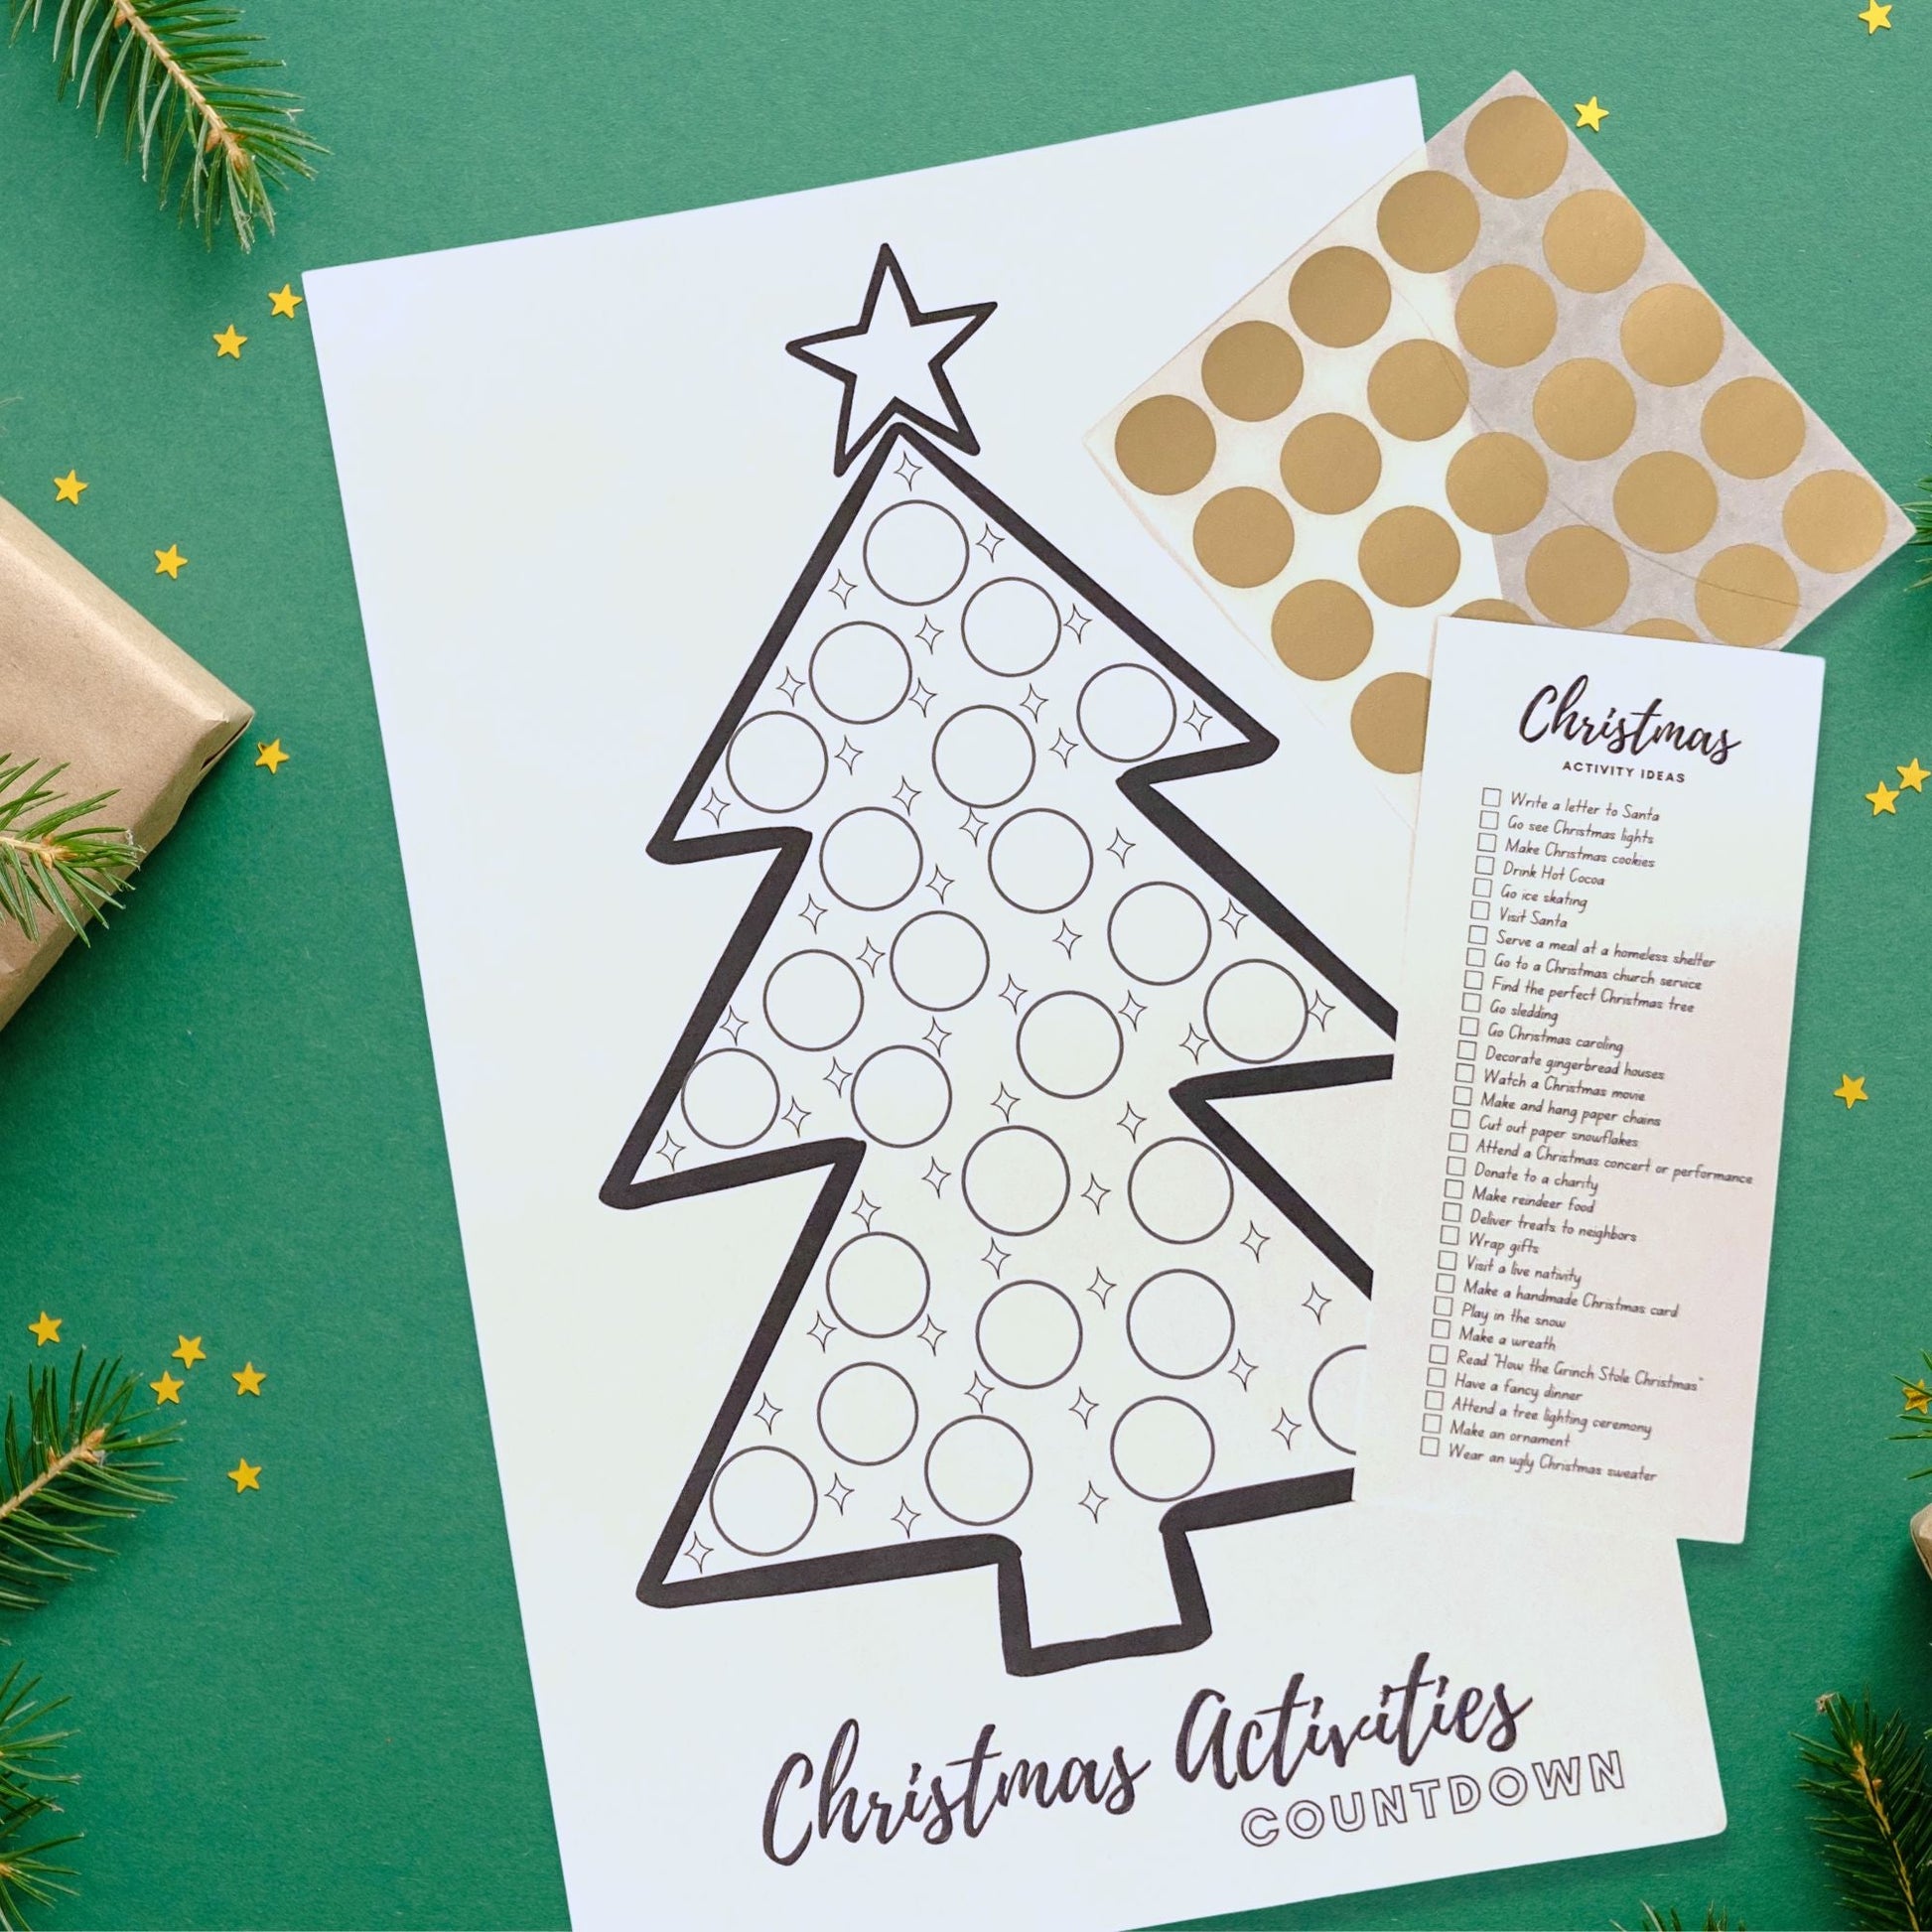 The Advent Scratch-off Christmas tree poster is displayed before it is filled out.